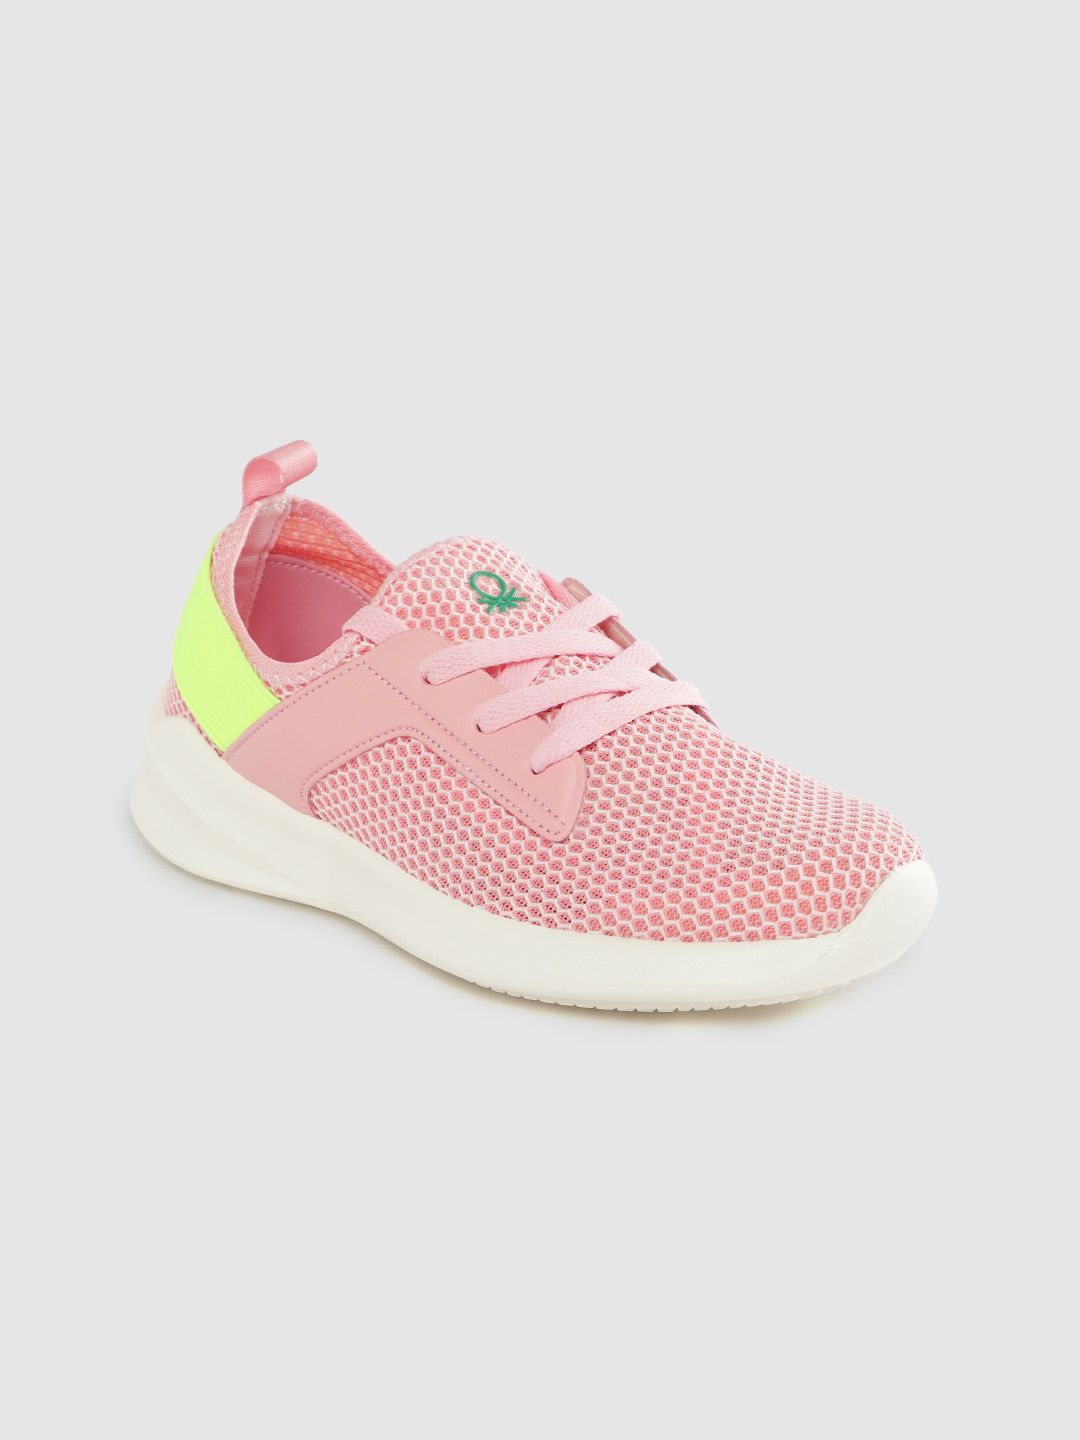 United Colors of Benetton Women Pink Woven Design Sneakers Price in India